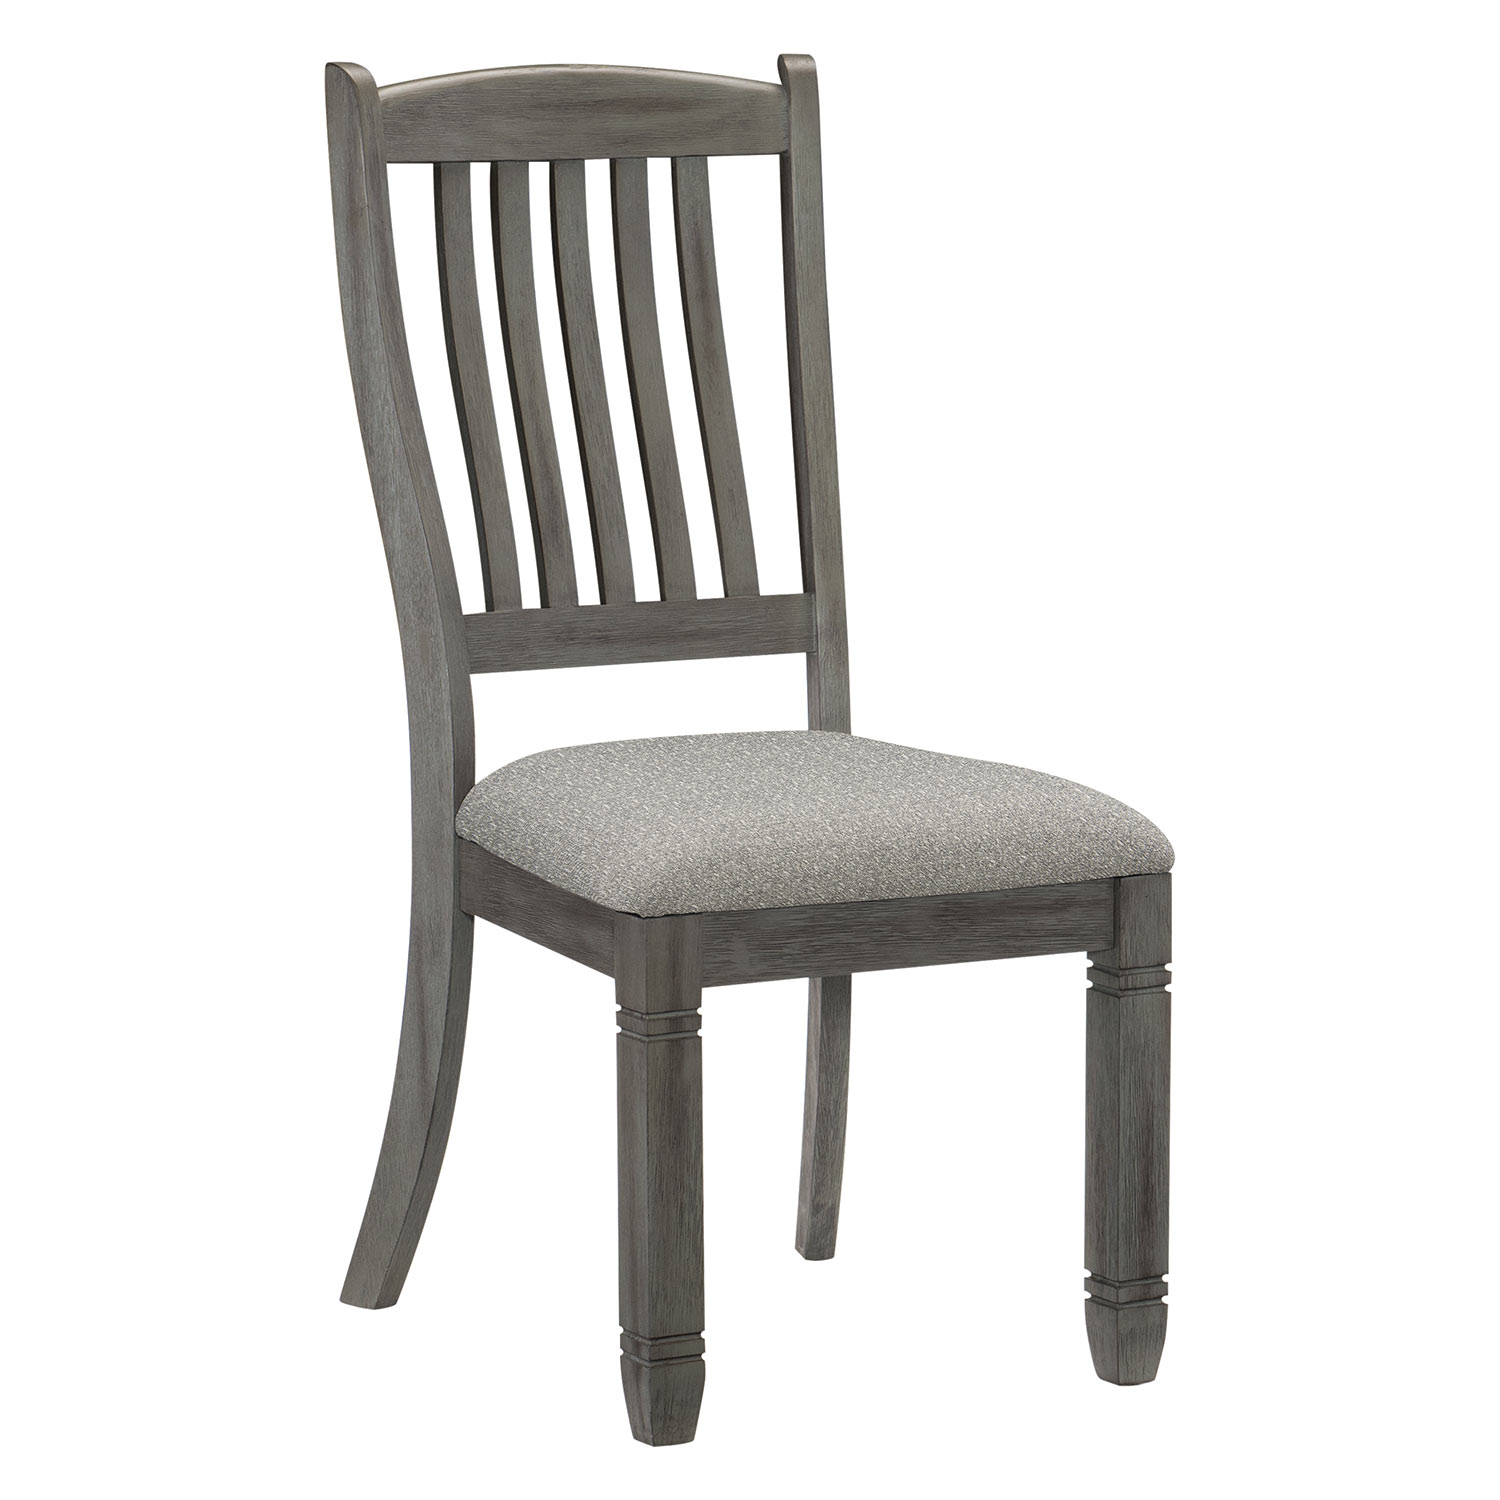 Homelegance Granby Side Chair - Antique Gray and Coffee